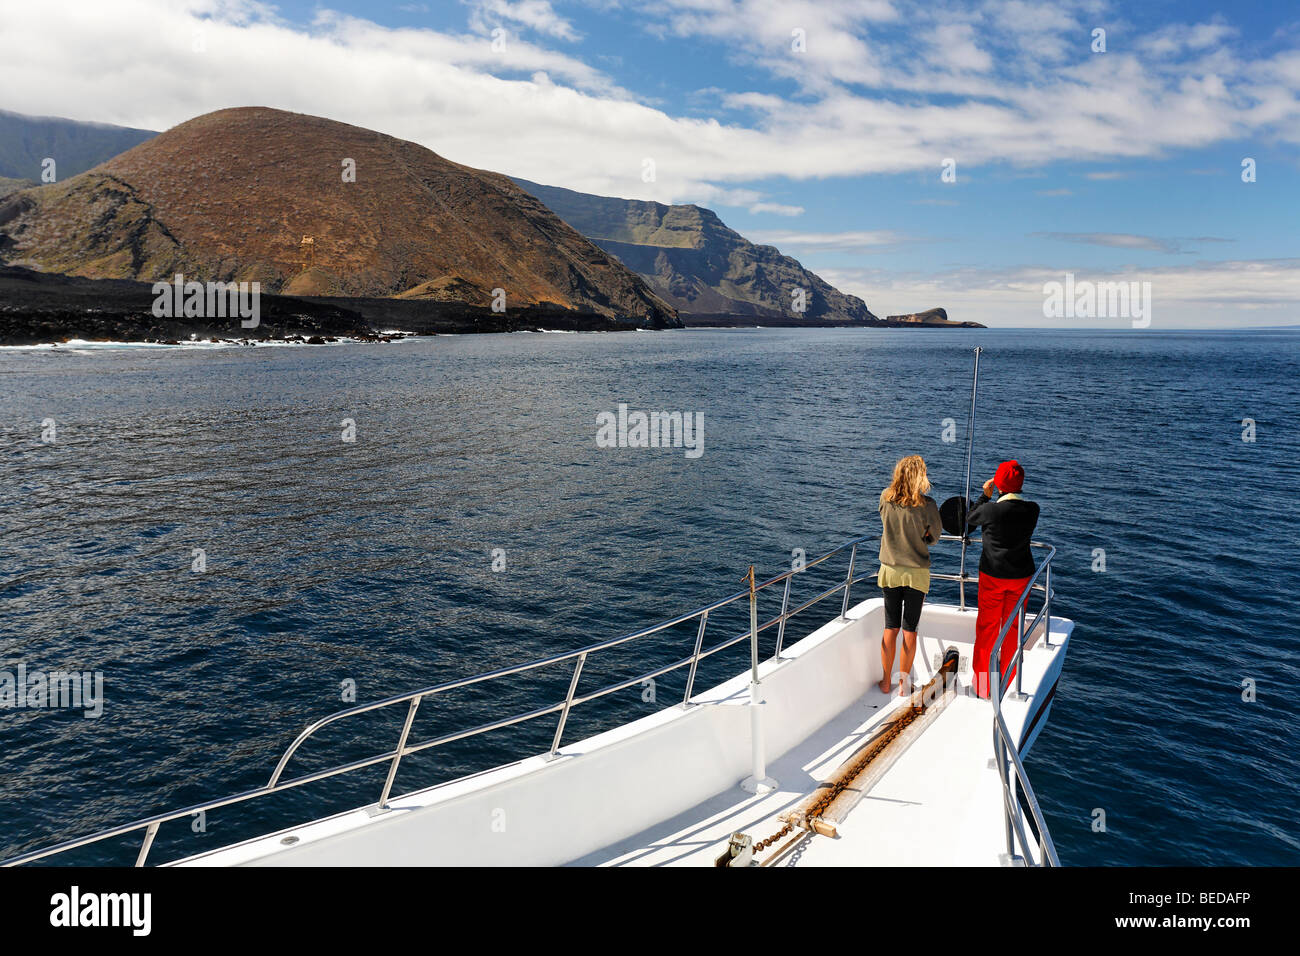 Two woman standing on the bow of the ship, Reina Silvia, volcanic mountains, northern tip of Ponta de Sao Vicente, Isabella Isl Stock Photo